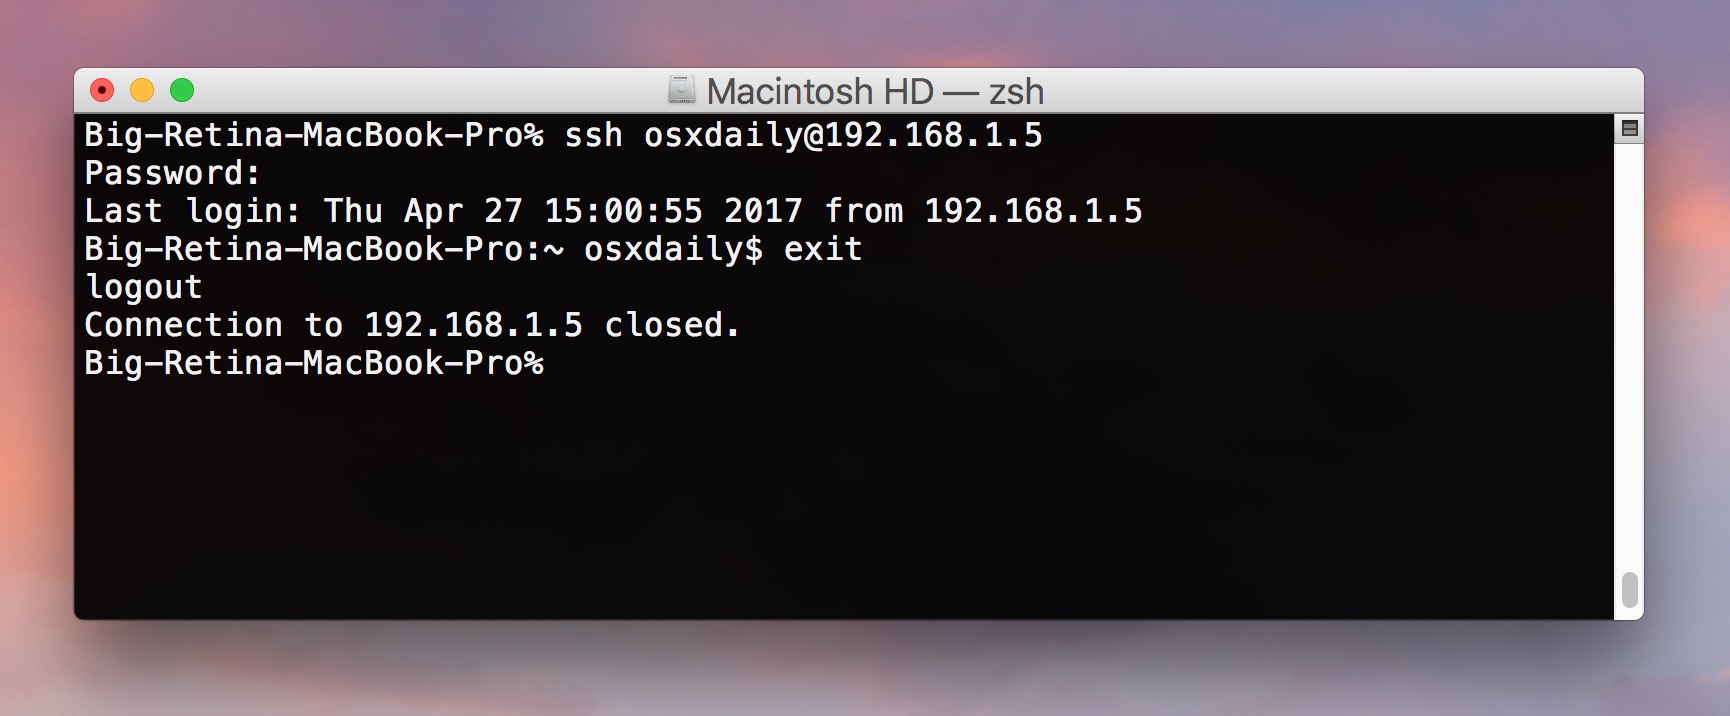 Download files from ssh linux